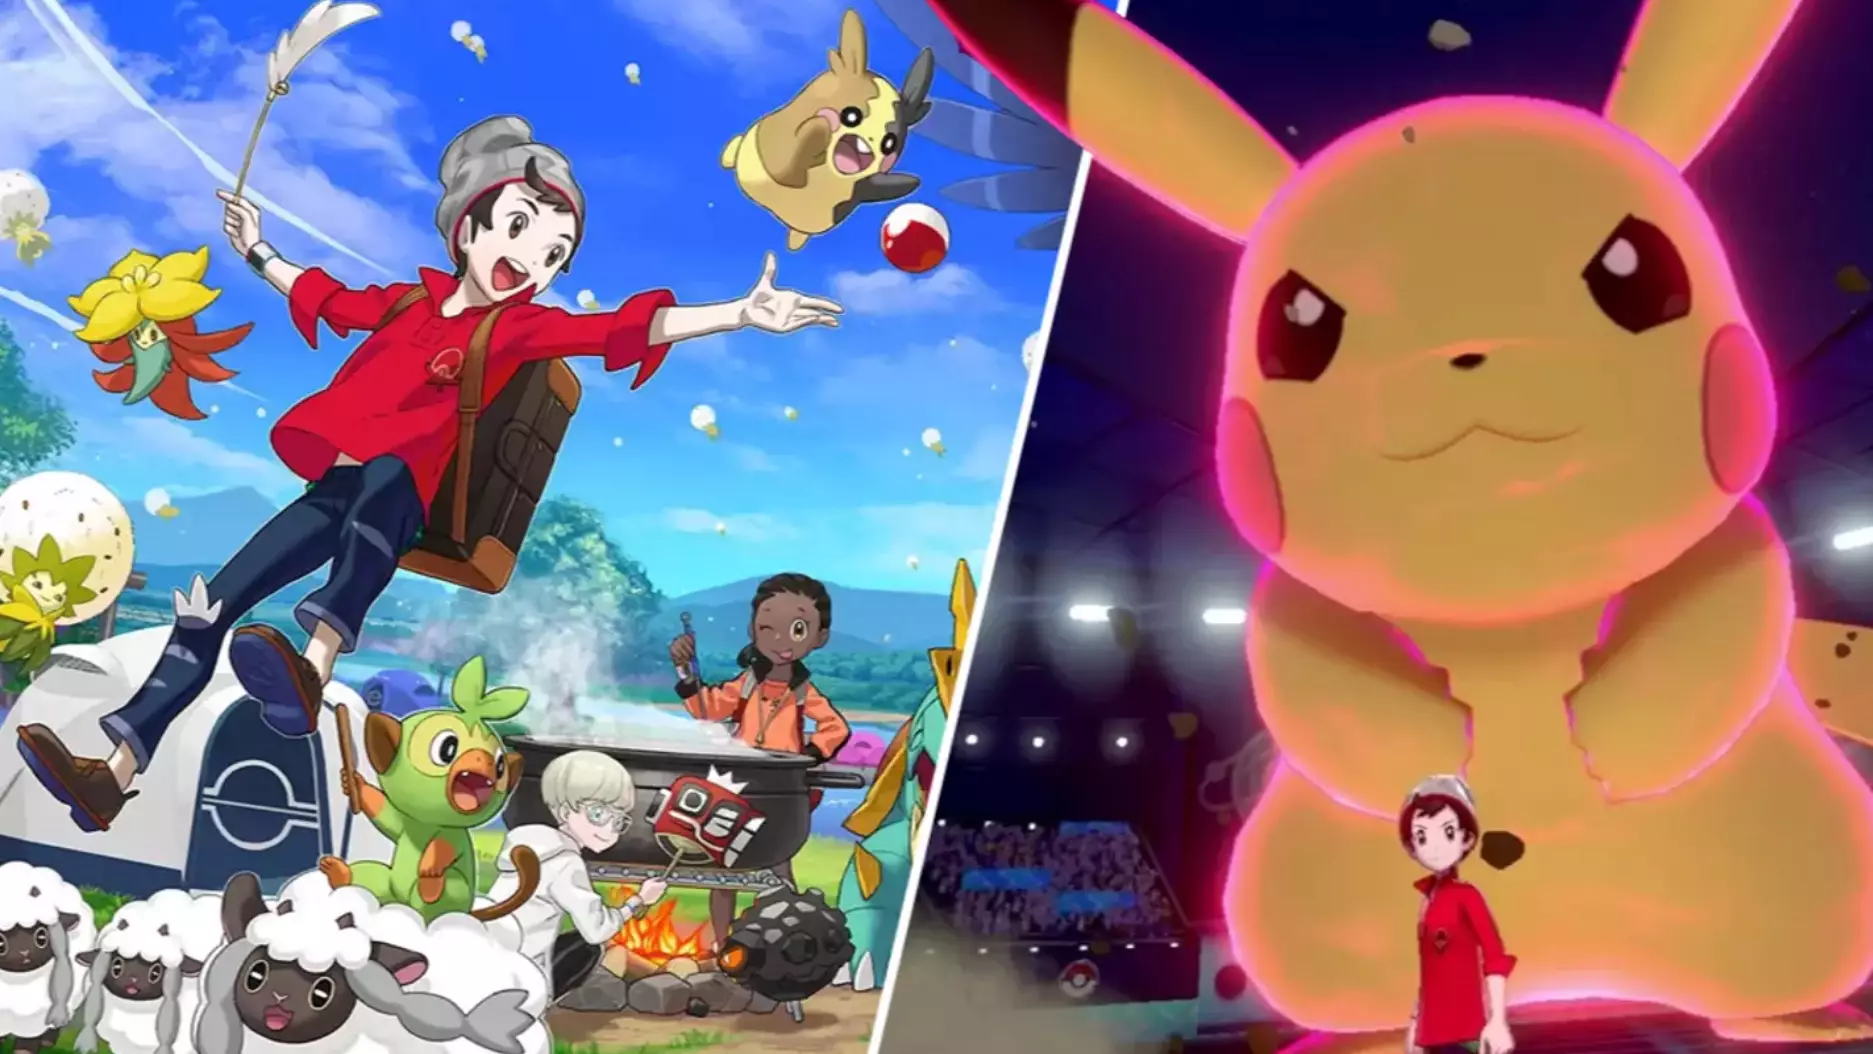 Yet Another Pokémon Game Is In The Works According To Leak